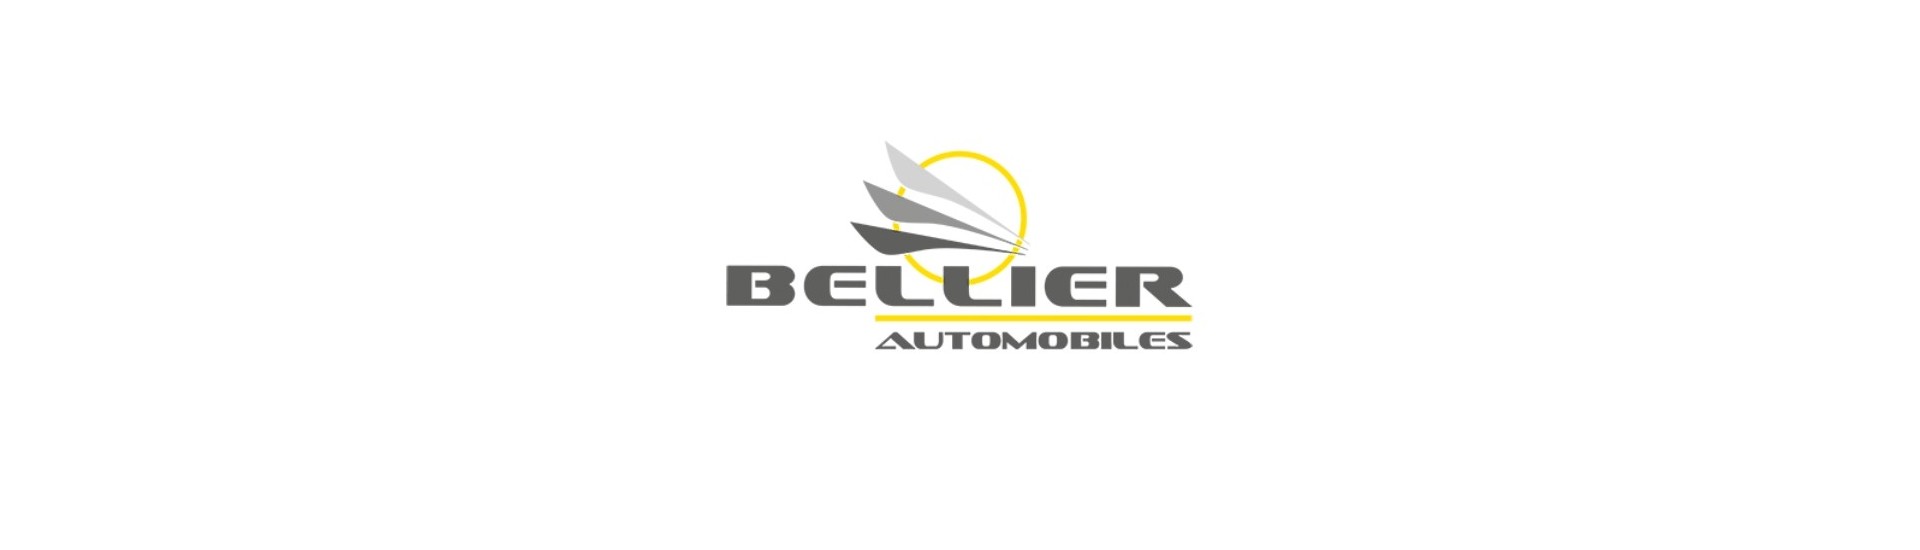 Speed lever at best price for car without license Bellier